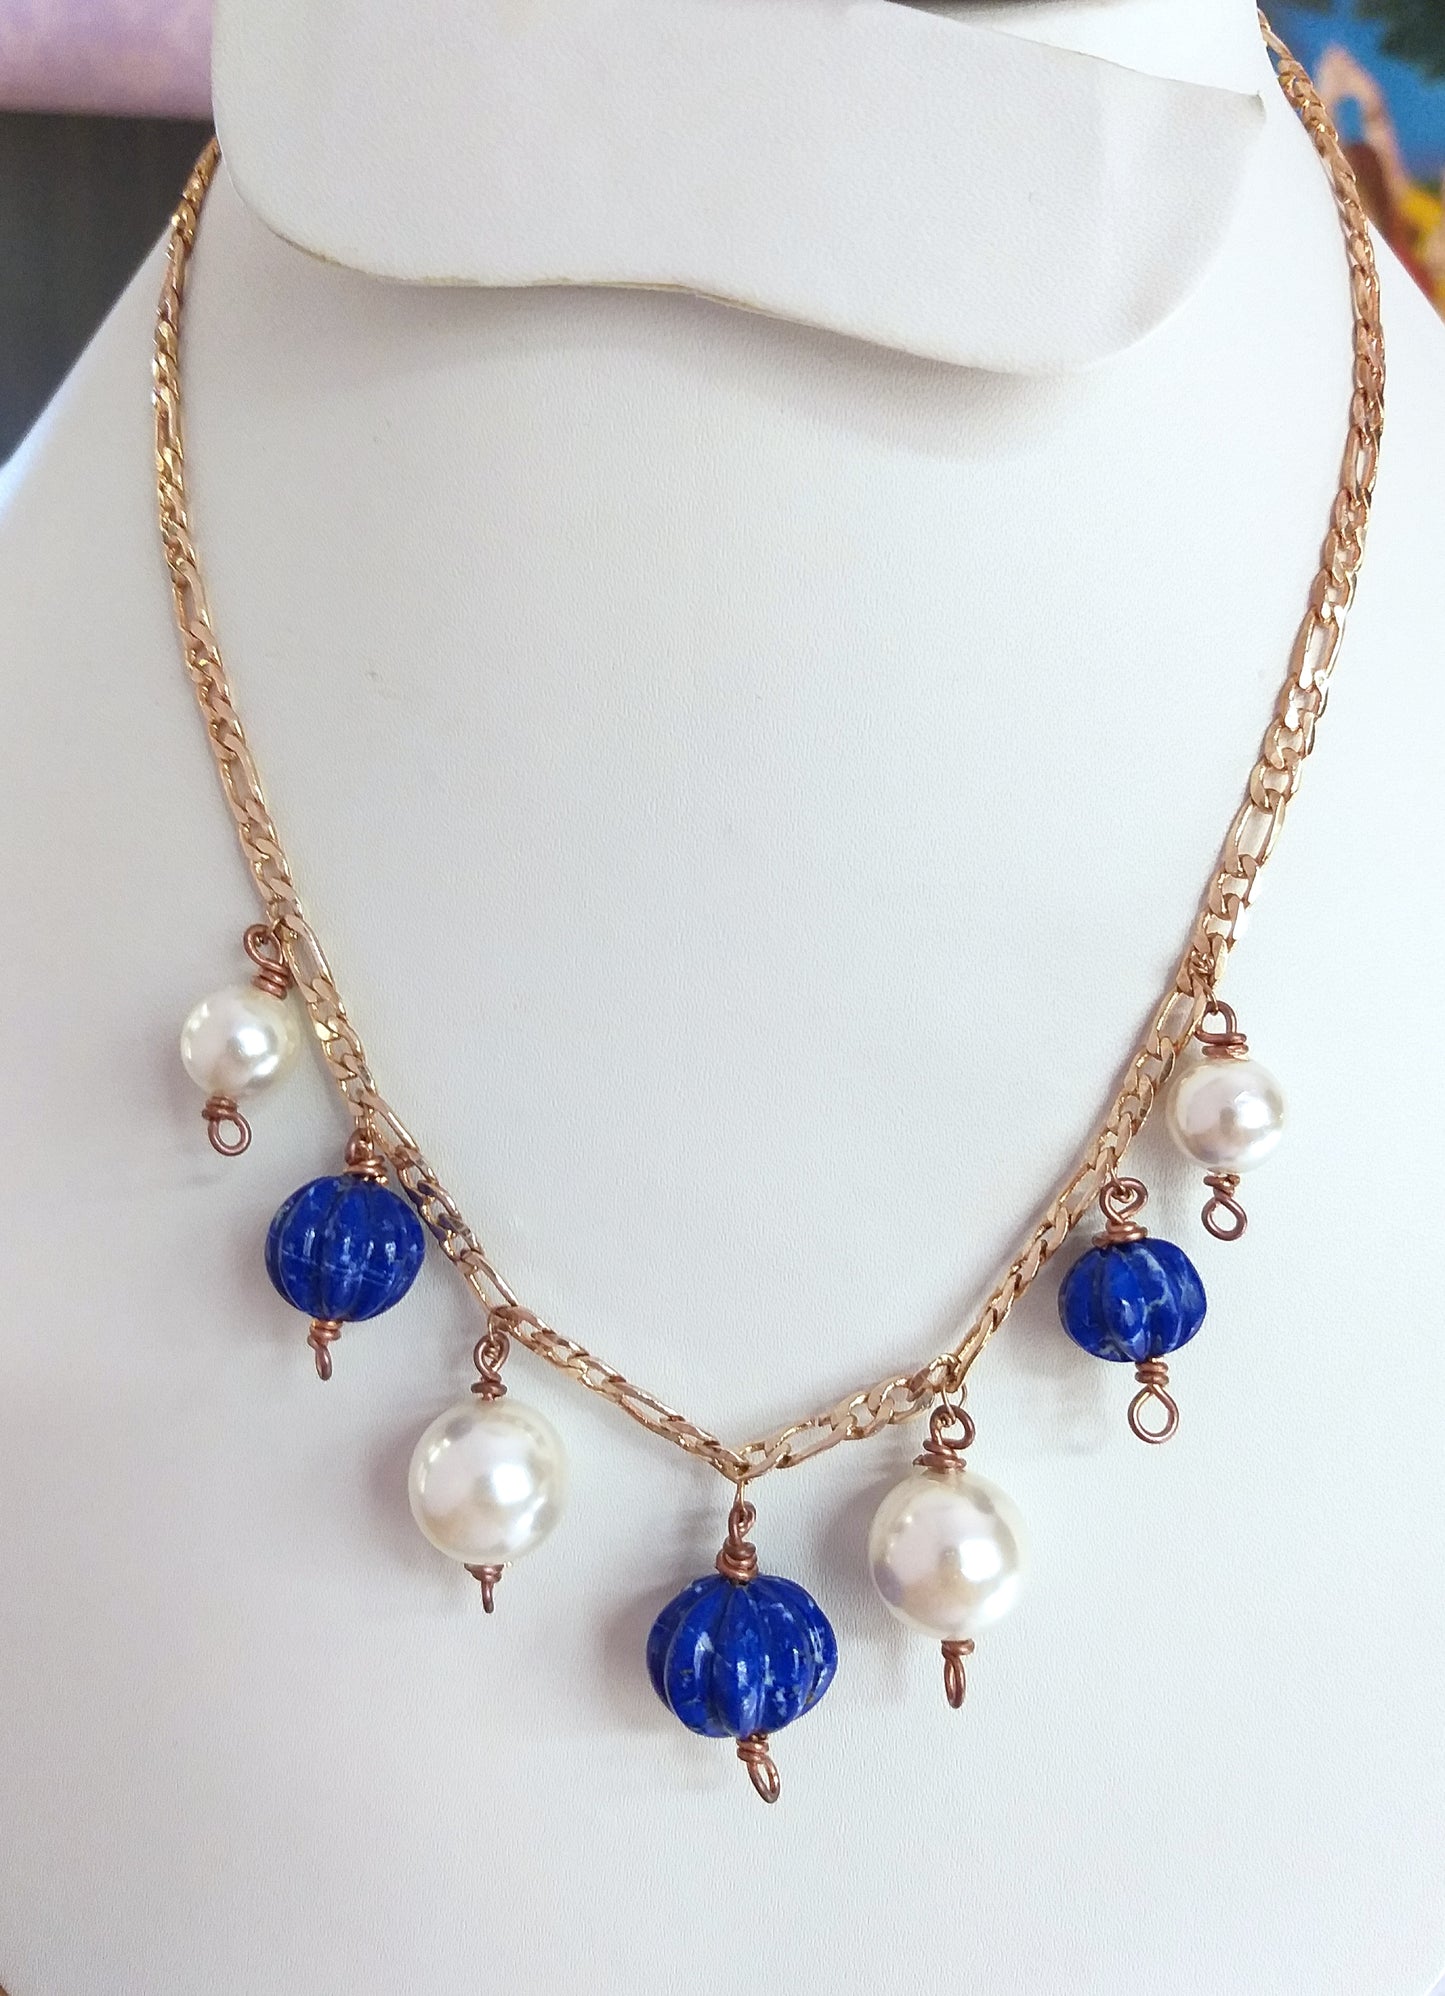 Natural Royal Deep Blue Lapis Lazuli and White Pearls Necklace and Earrings